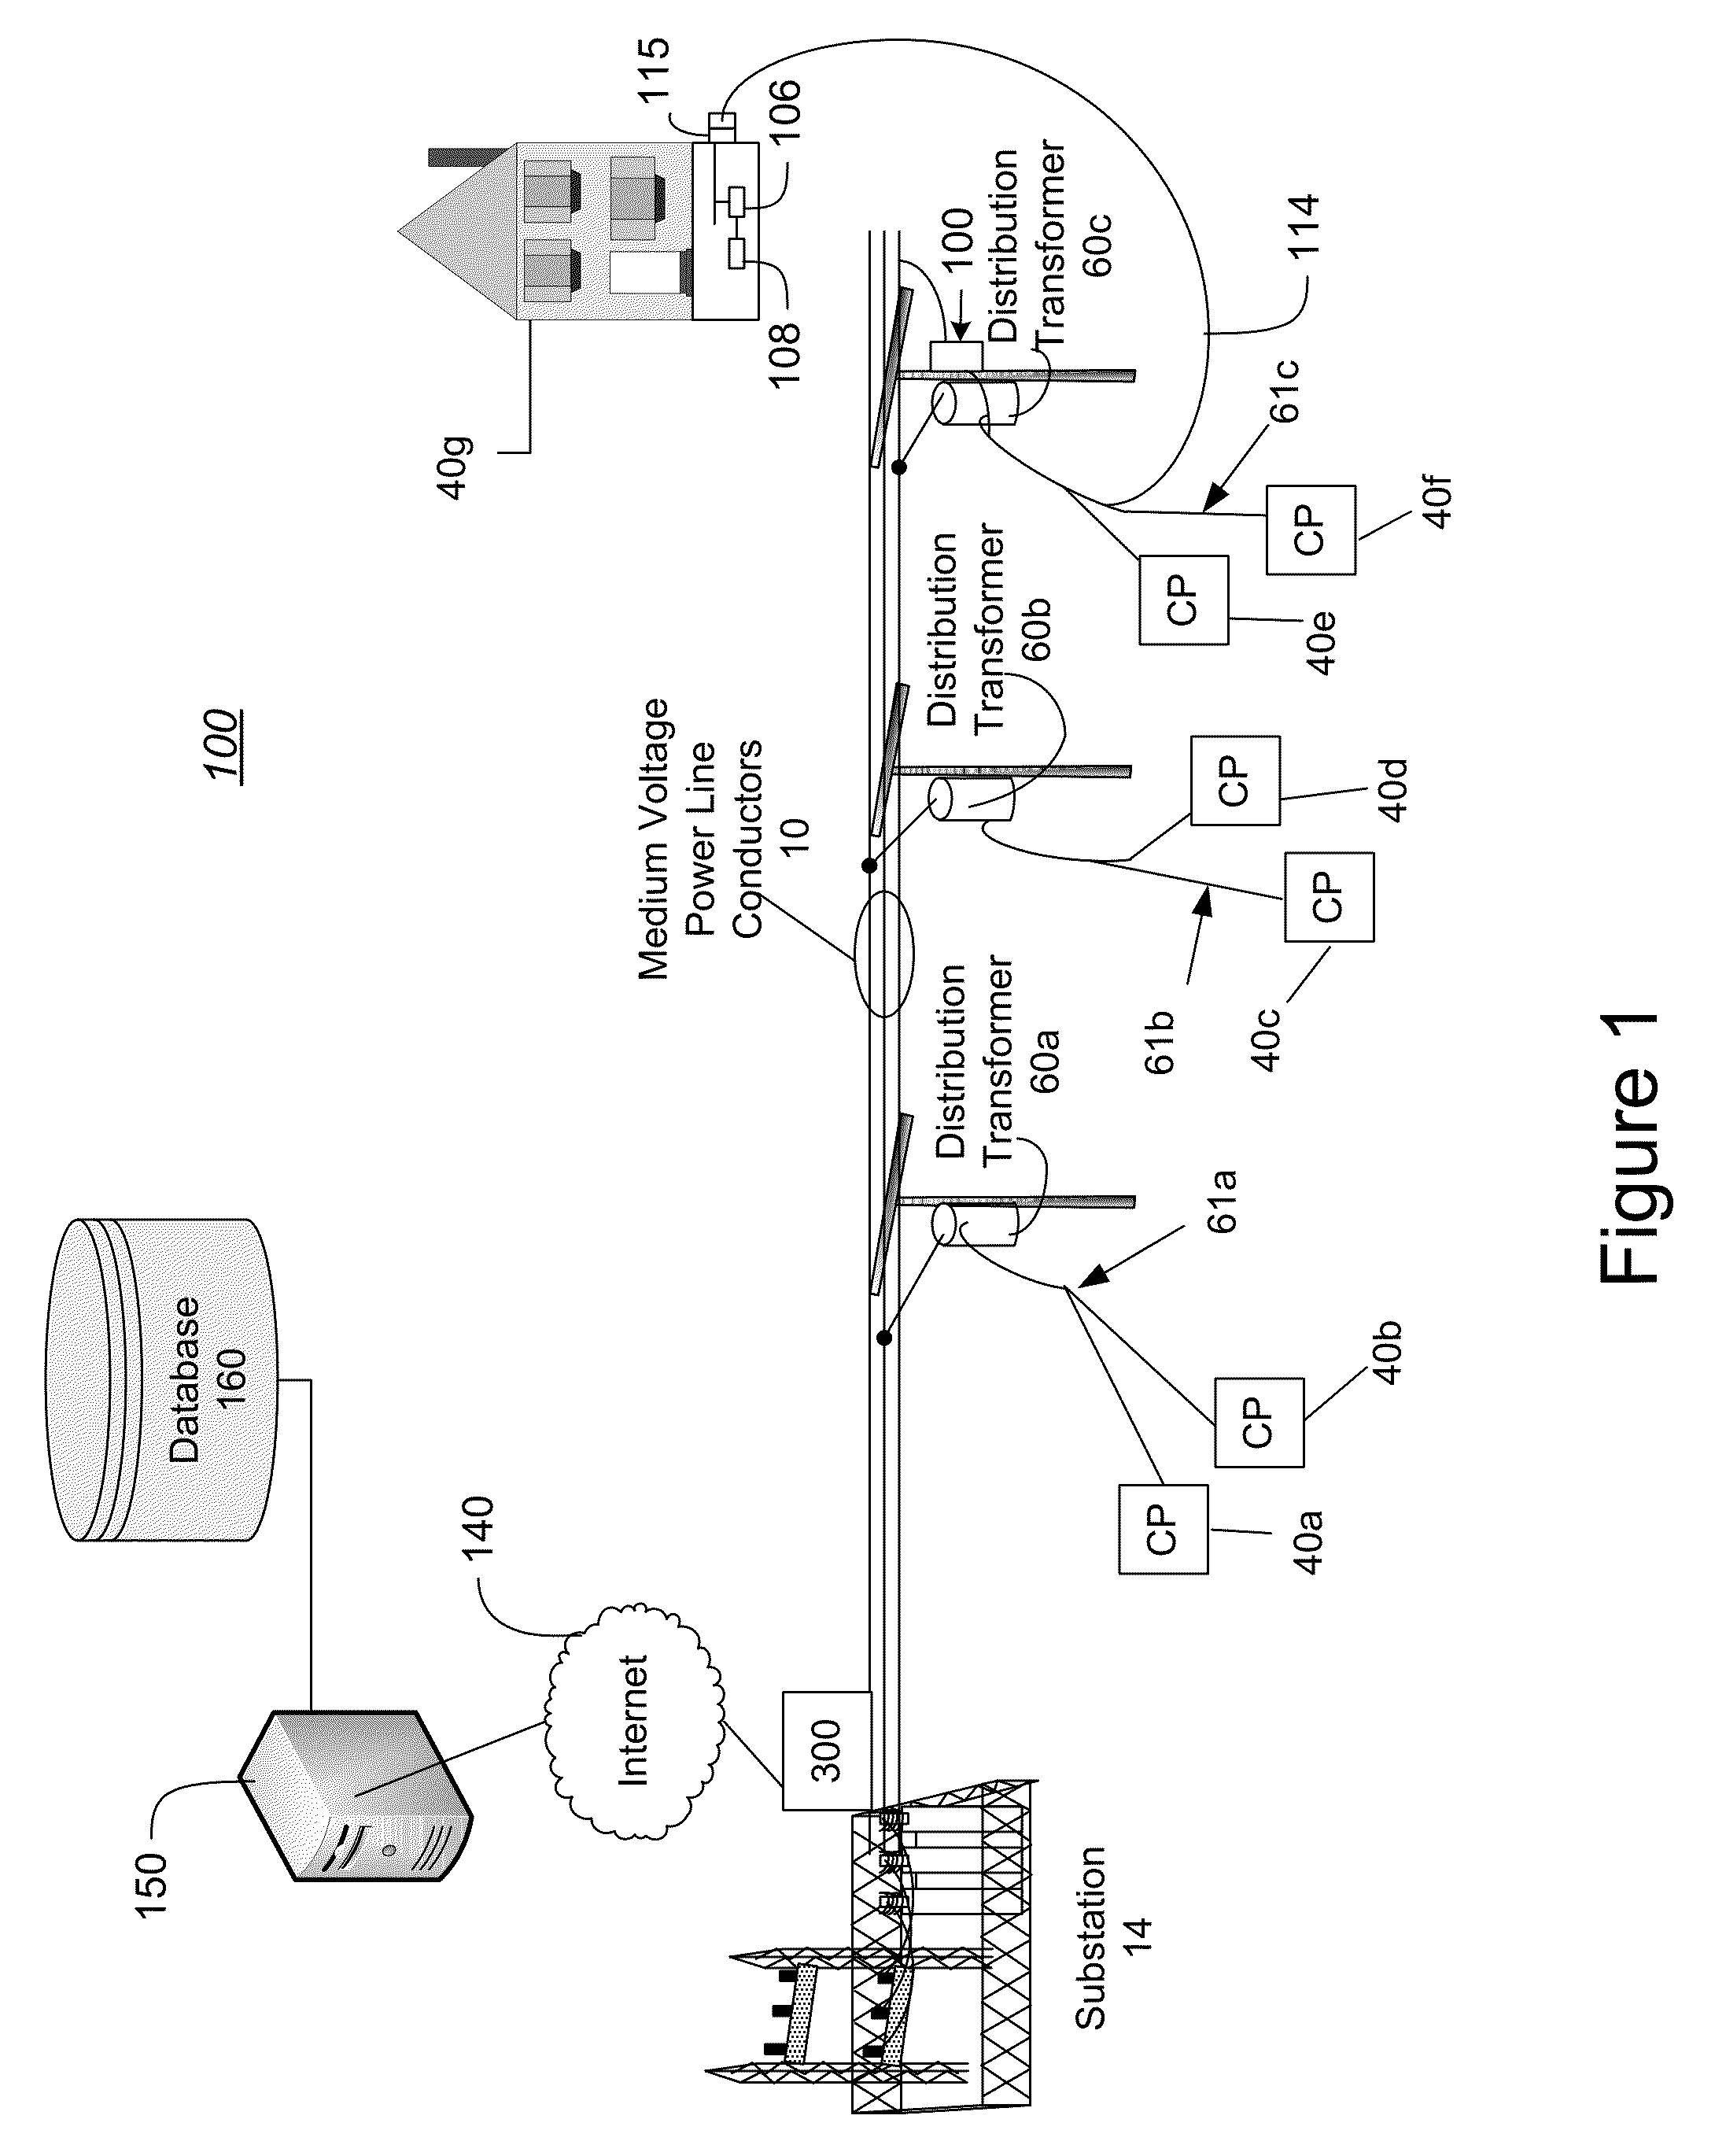 System, Method and Computer Program Product for Determining Load Profiles